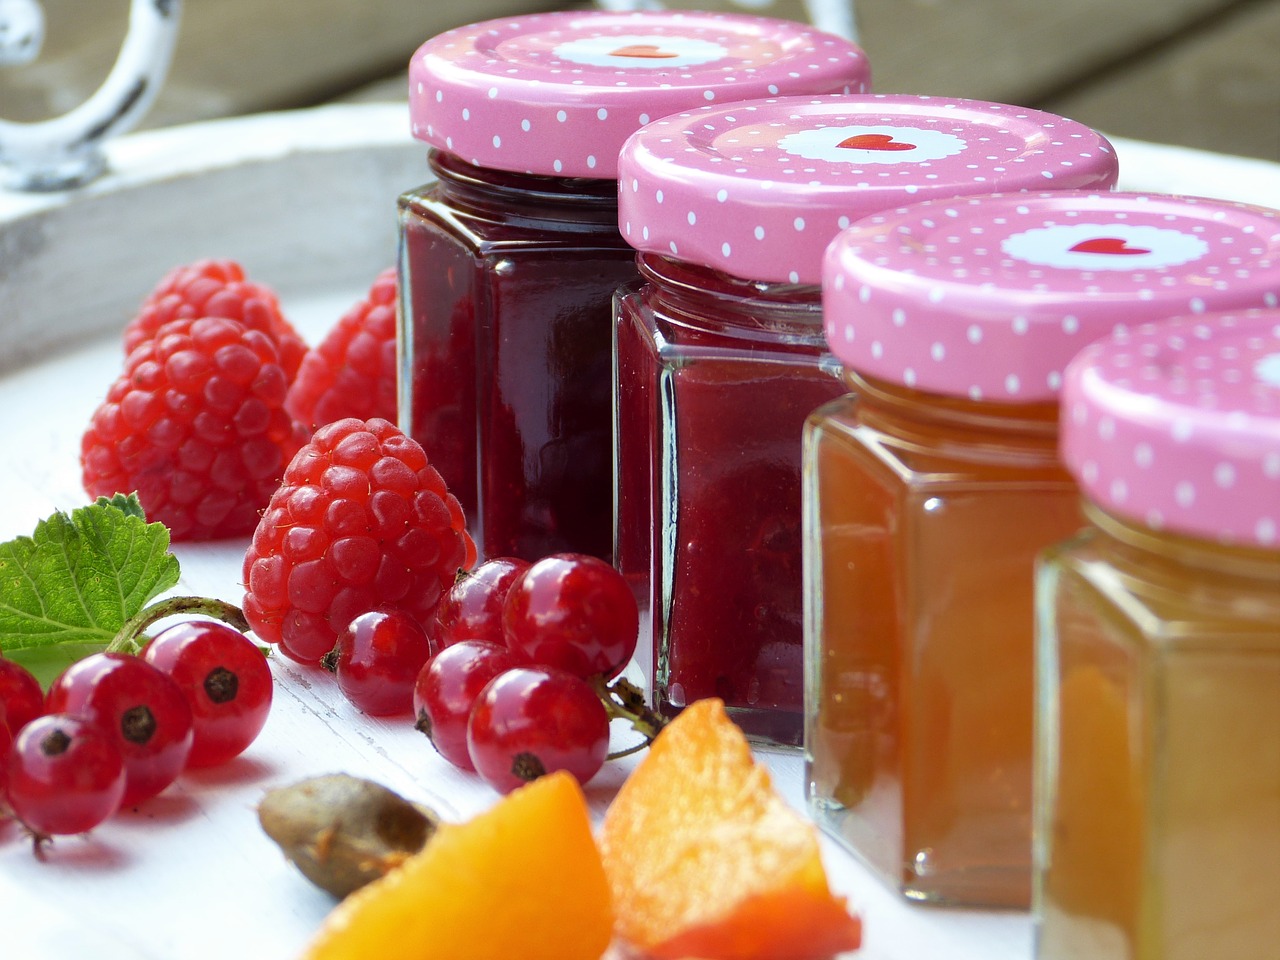 Lock summer in a jar. Recipes for delicious and simple preserves